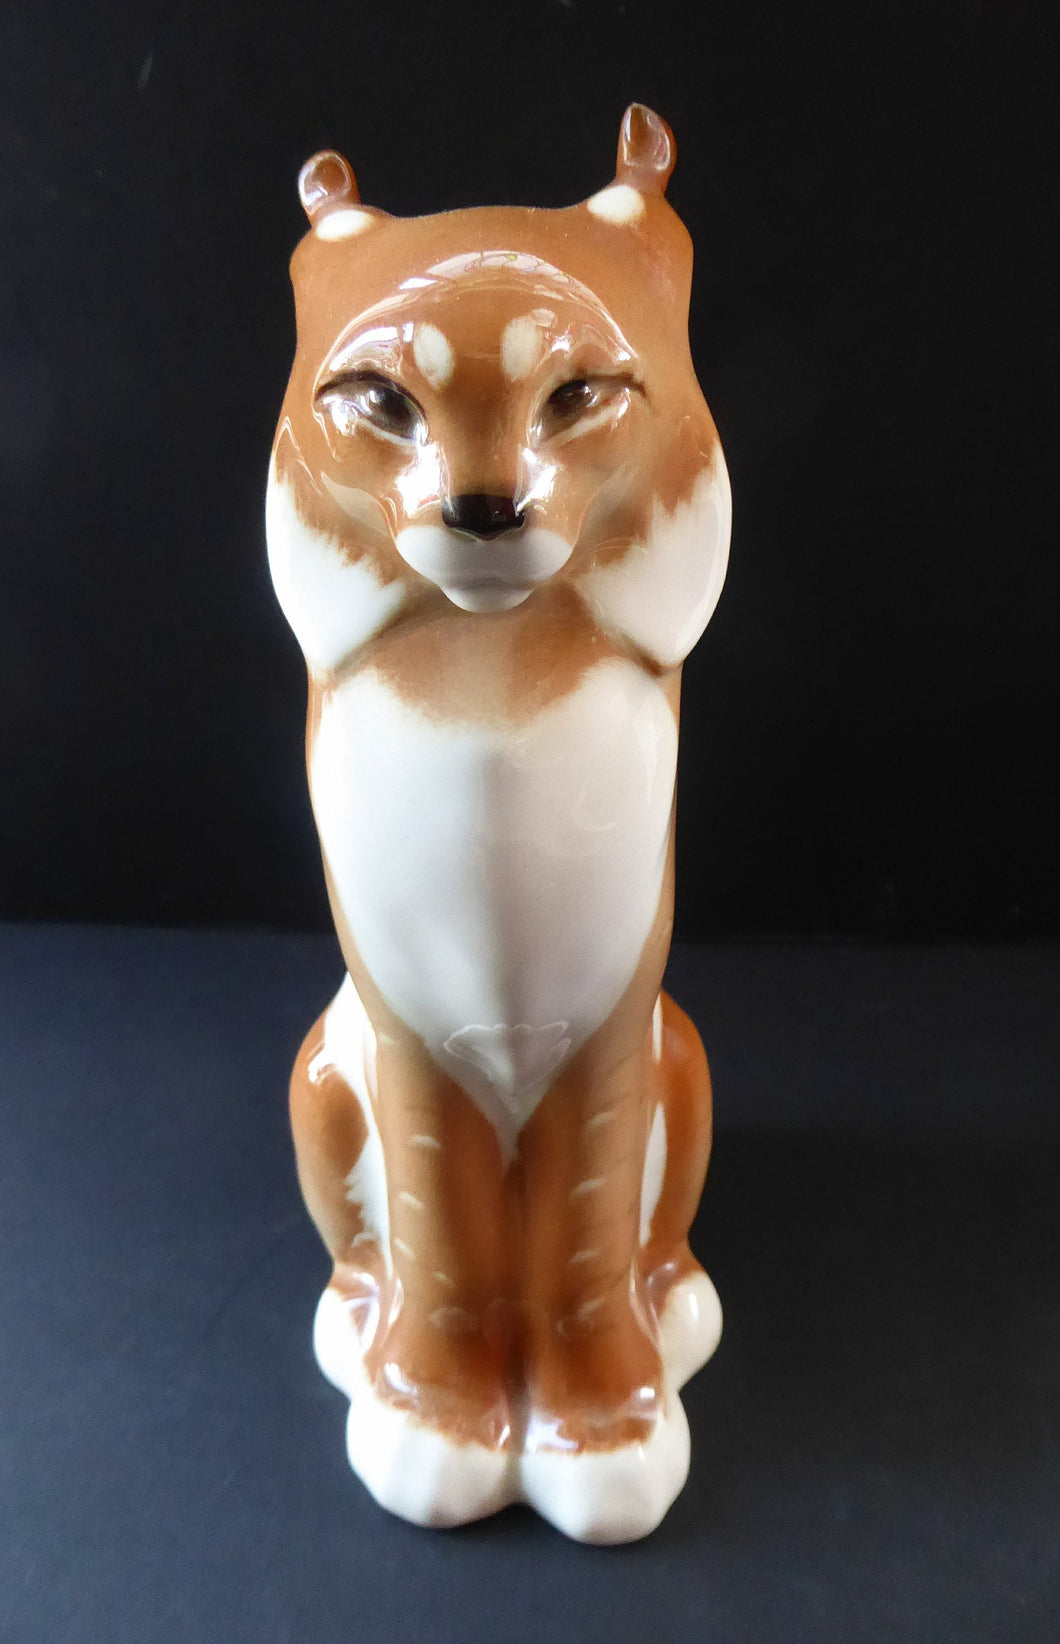 Vintage RUSSIAN USSR Lomonosov Porcelain Lynx or Wild Cat Figurine. 8 1/4 inches in height